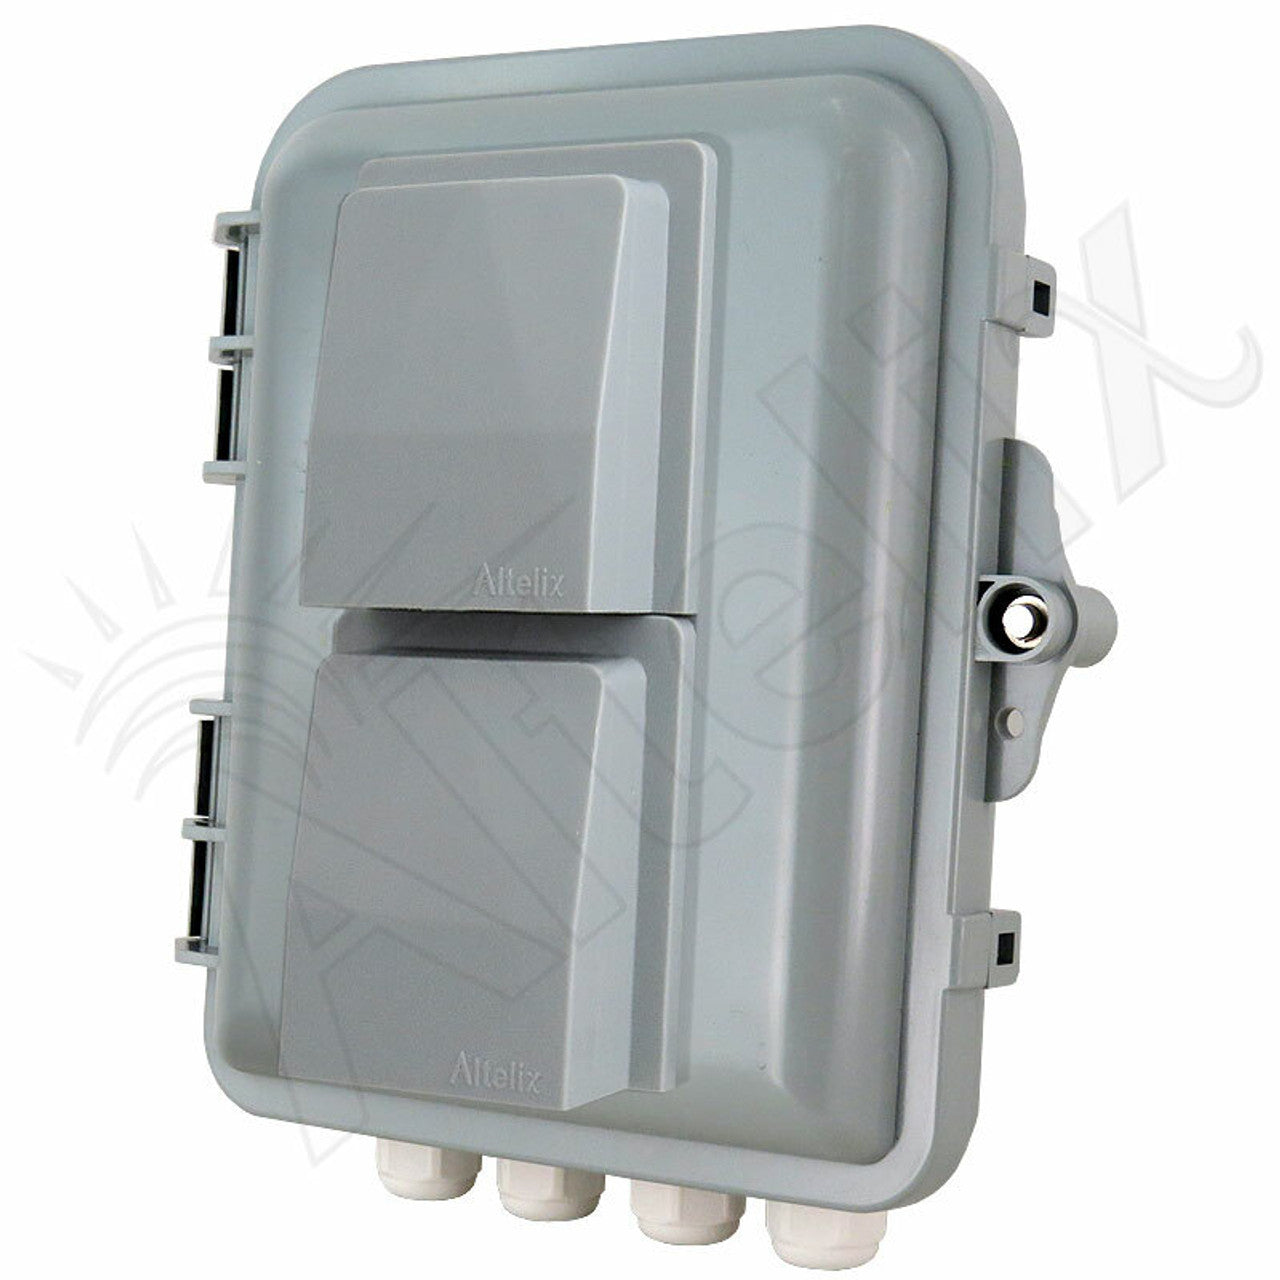 Altelix 9x8x3 PC+ABS Weatherproof Vented Utility Box NEMA Enclosure with Hinged Door and Aluminum Mounting Plate